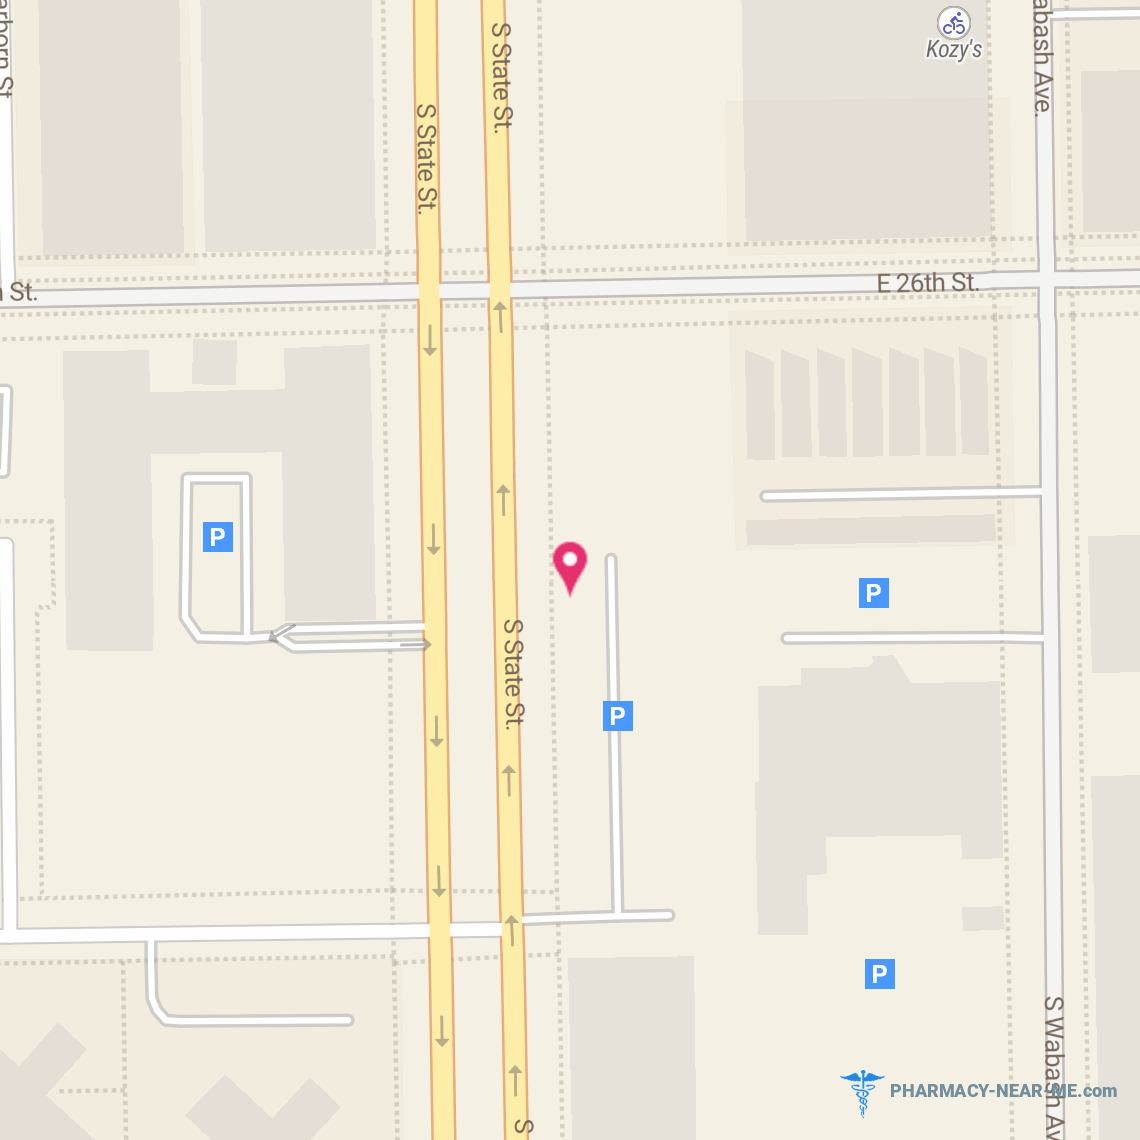 WALGREENS #16441 - Pharmacy Hours, Phone, Reviews & Information: 2525 S King Dr, Chicago, Illinois 60616, United States